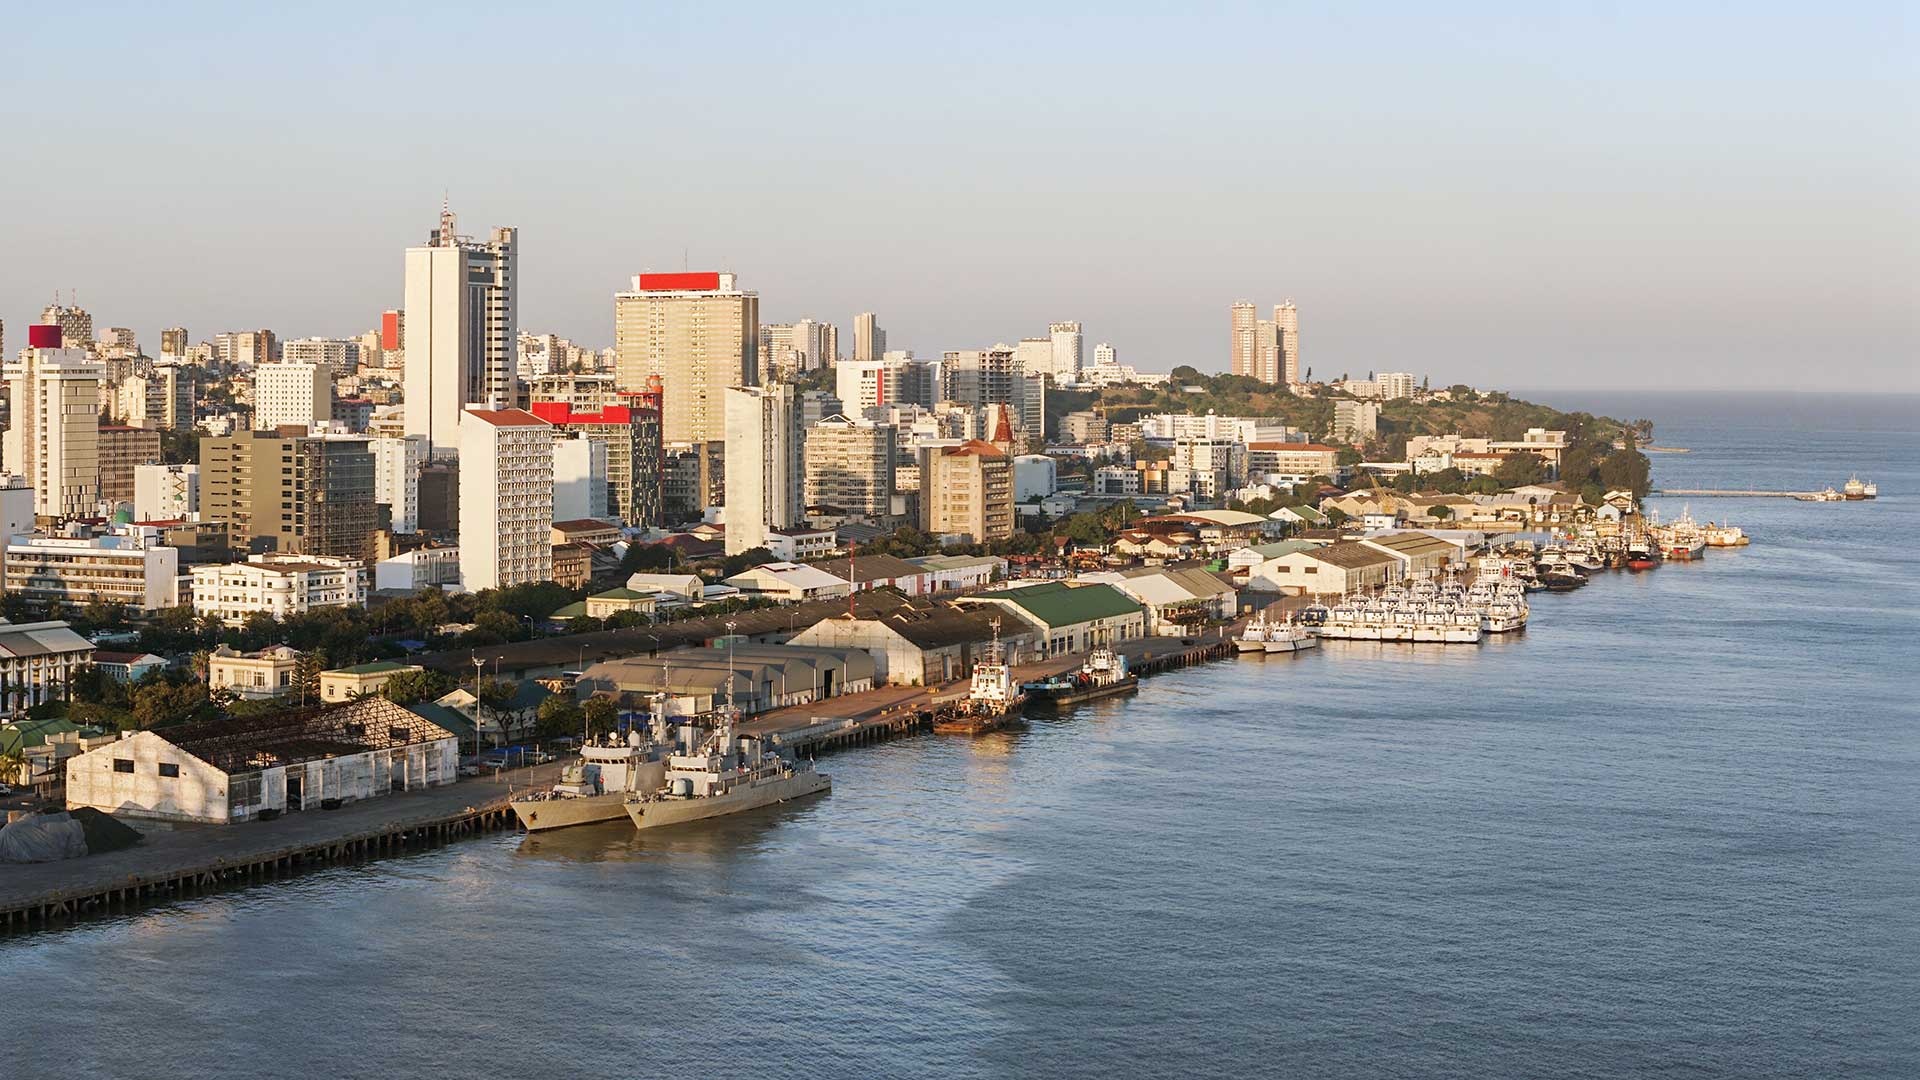 Maputo (Mozambique), Sea fastening, Offshore structures, Industrial securing, 1920x1080 Full HD Desktop